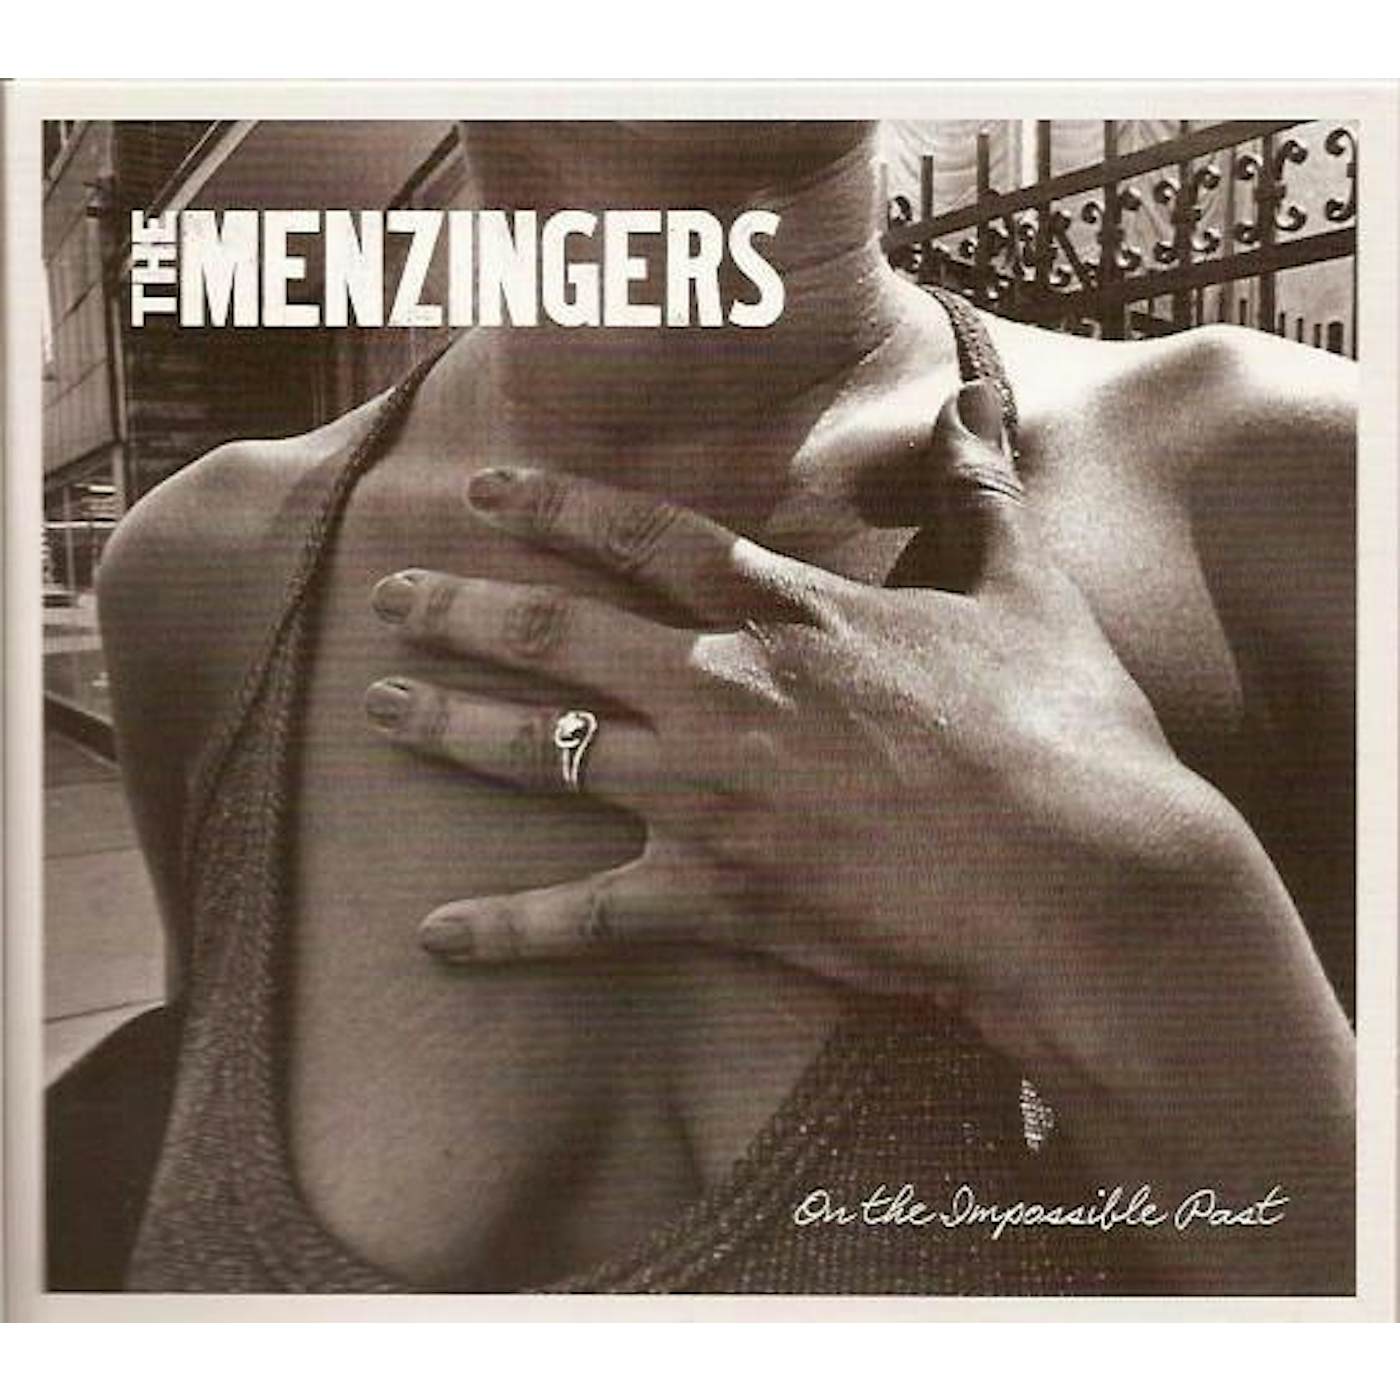 The Menzingers ON THE IMPOSSIBLE PAST CD